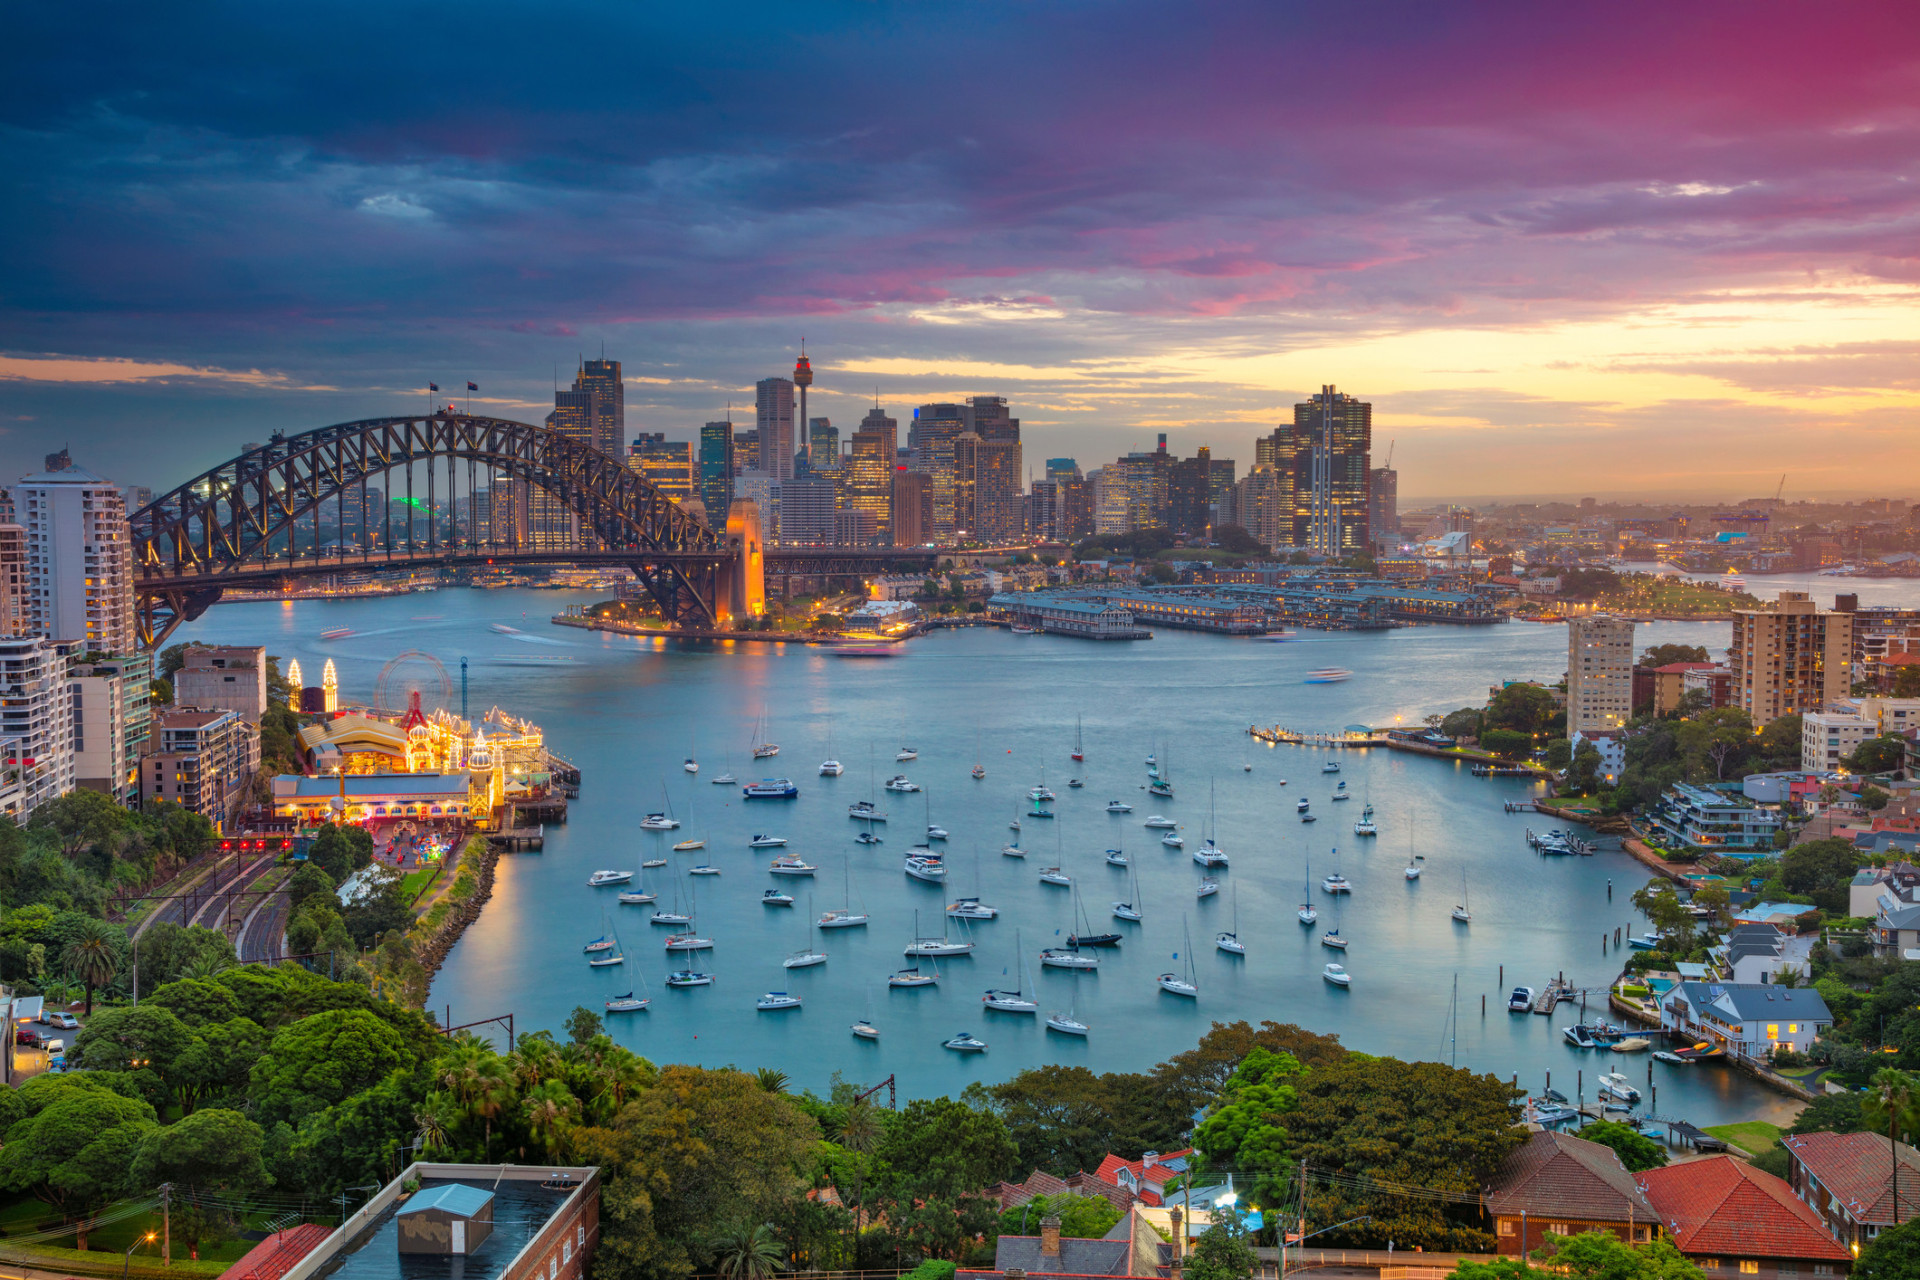 Iconic Sydney Harbor is today the stuff of picture postcards. It's also the most populous city in Australia!<p>You may also like:<a href="https://www.starsinsider.com/n/380283?utm_source=msn.com&utm_medium=display&utm_campaign=referral_description&utm_content=292997v1en-us"> Have you had these top 10 common nightmares? </a></p>